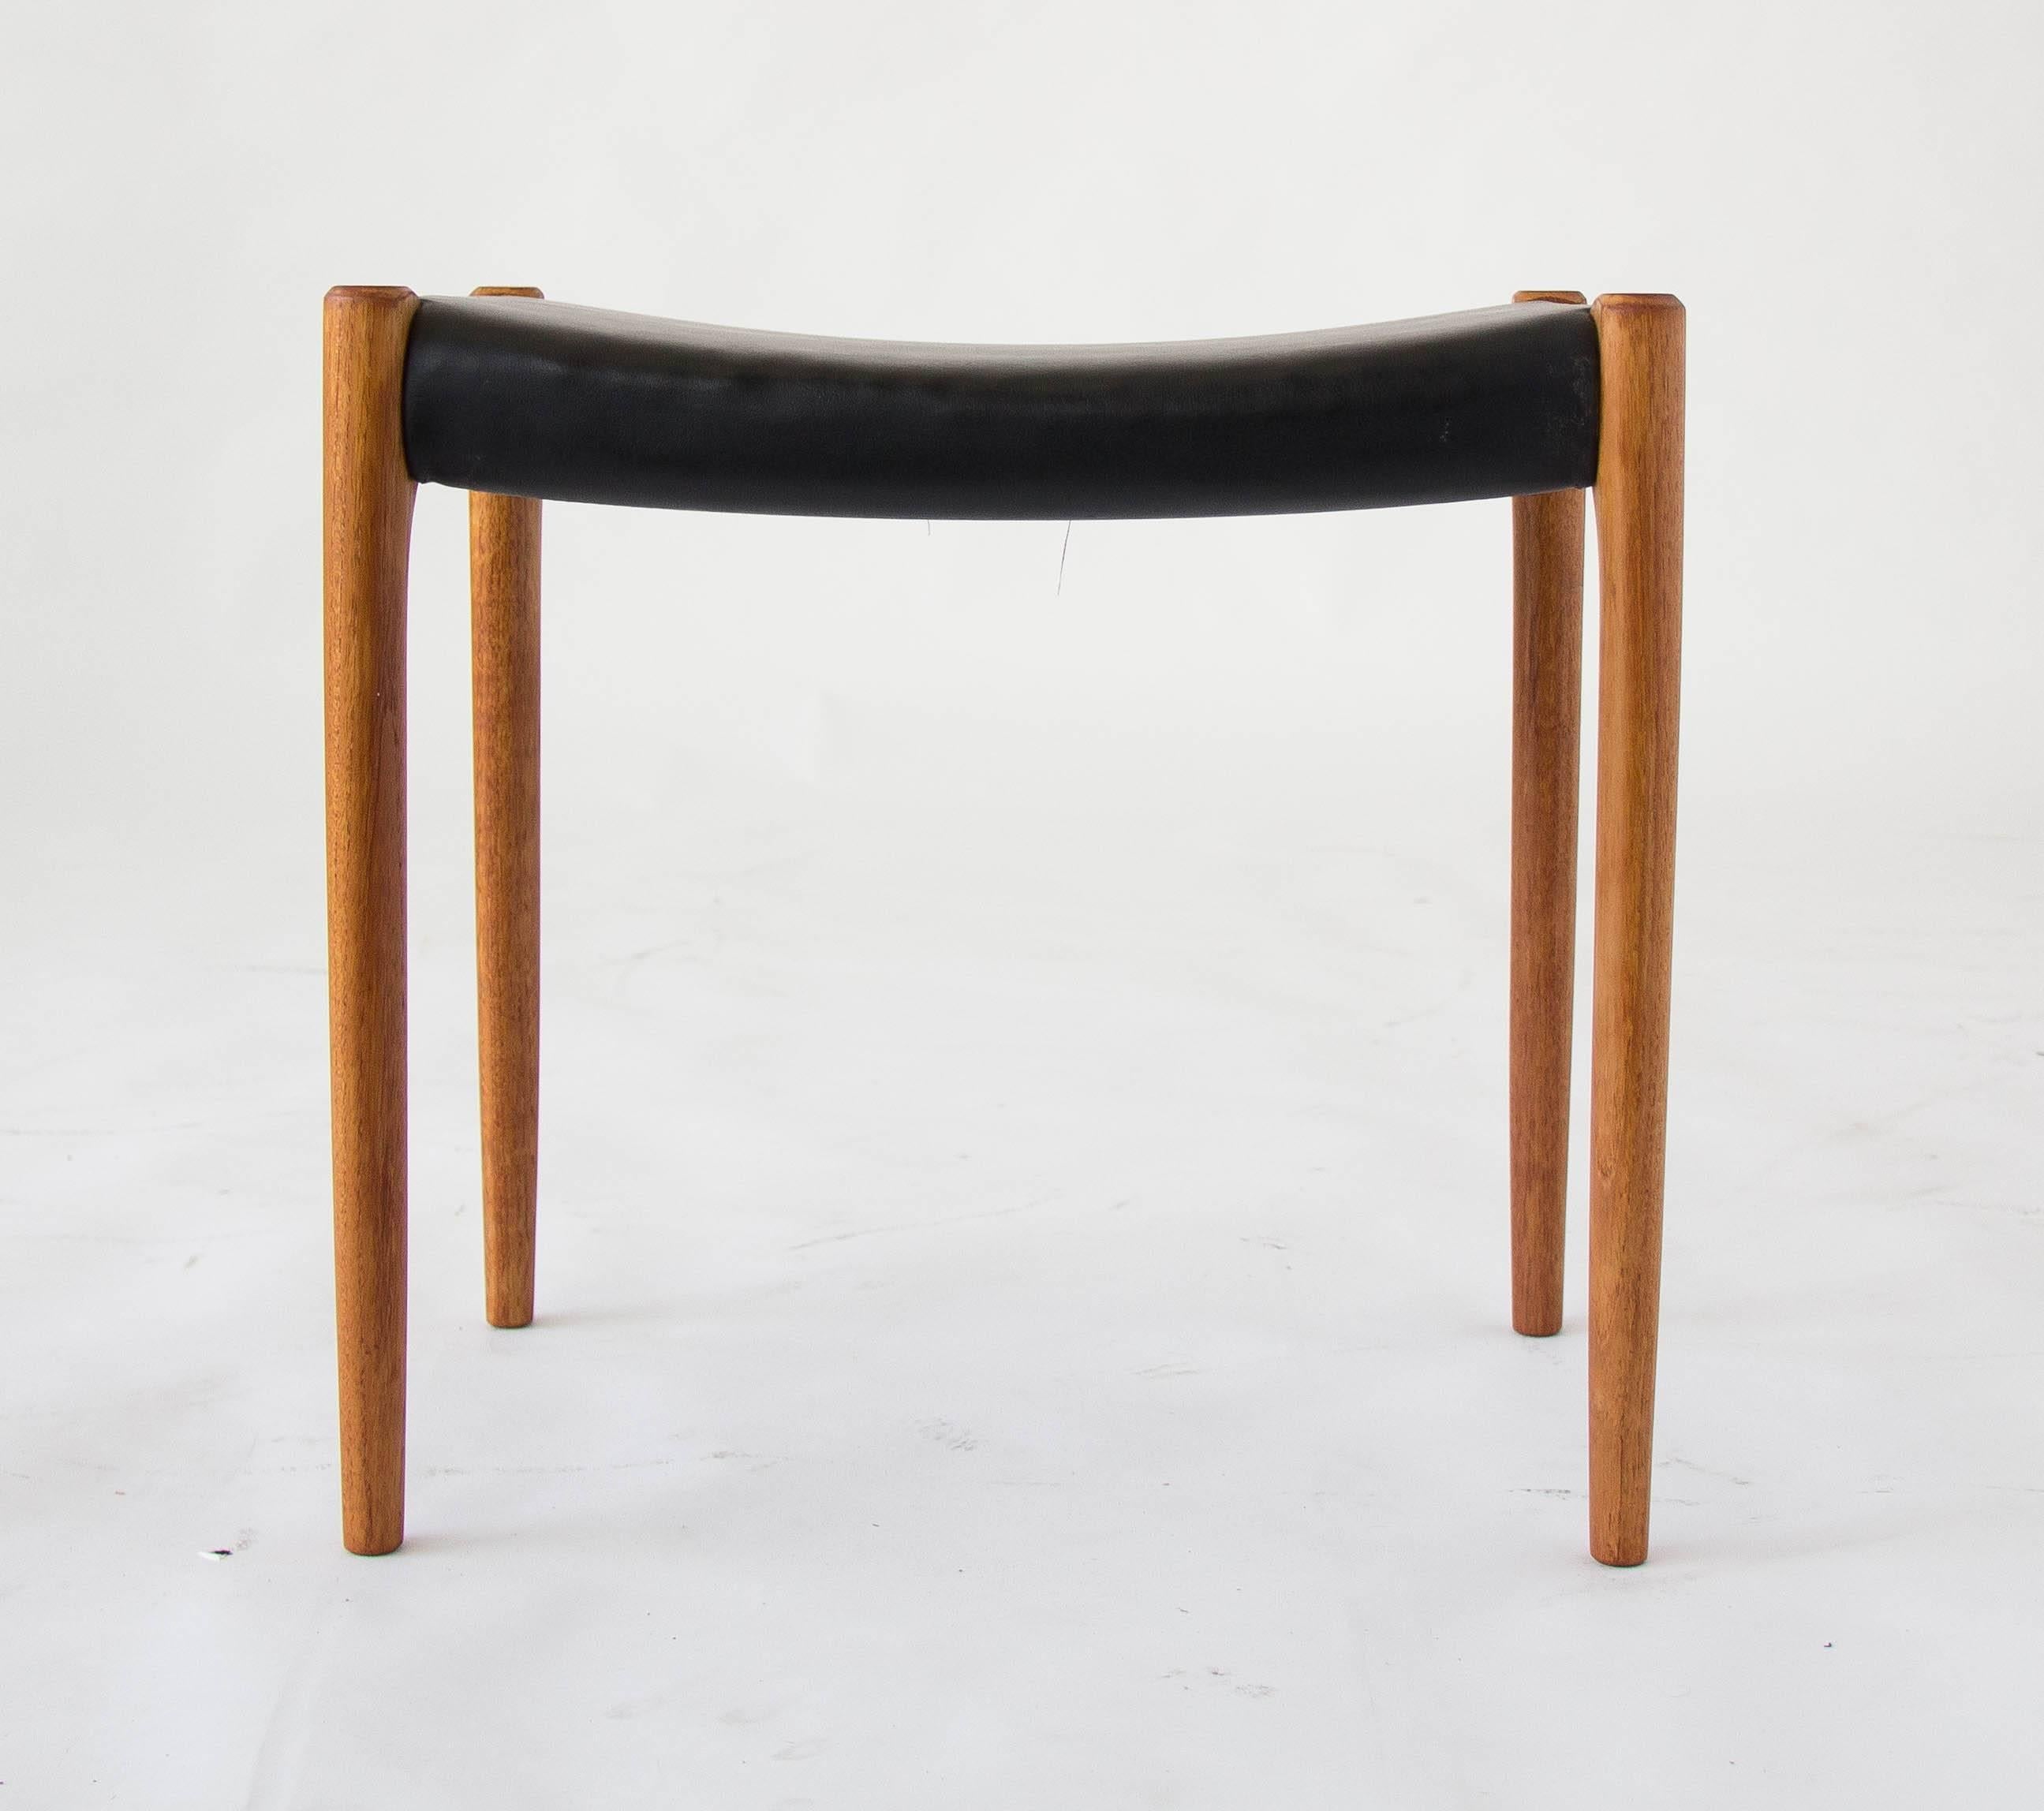 Simple ottoman with slightly tapered legs, designed by Niels Møller for JL Møllers Møbelfabrik of Denmark. The vinyl upholstery is original and the legs and frame are solid teak. 

Condition: Excellent vintage condition; professionally cleaned and